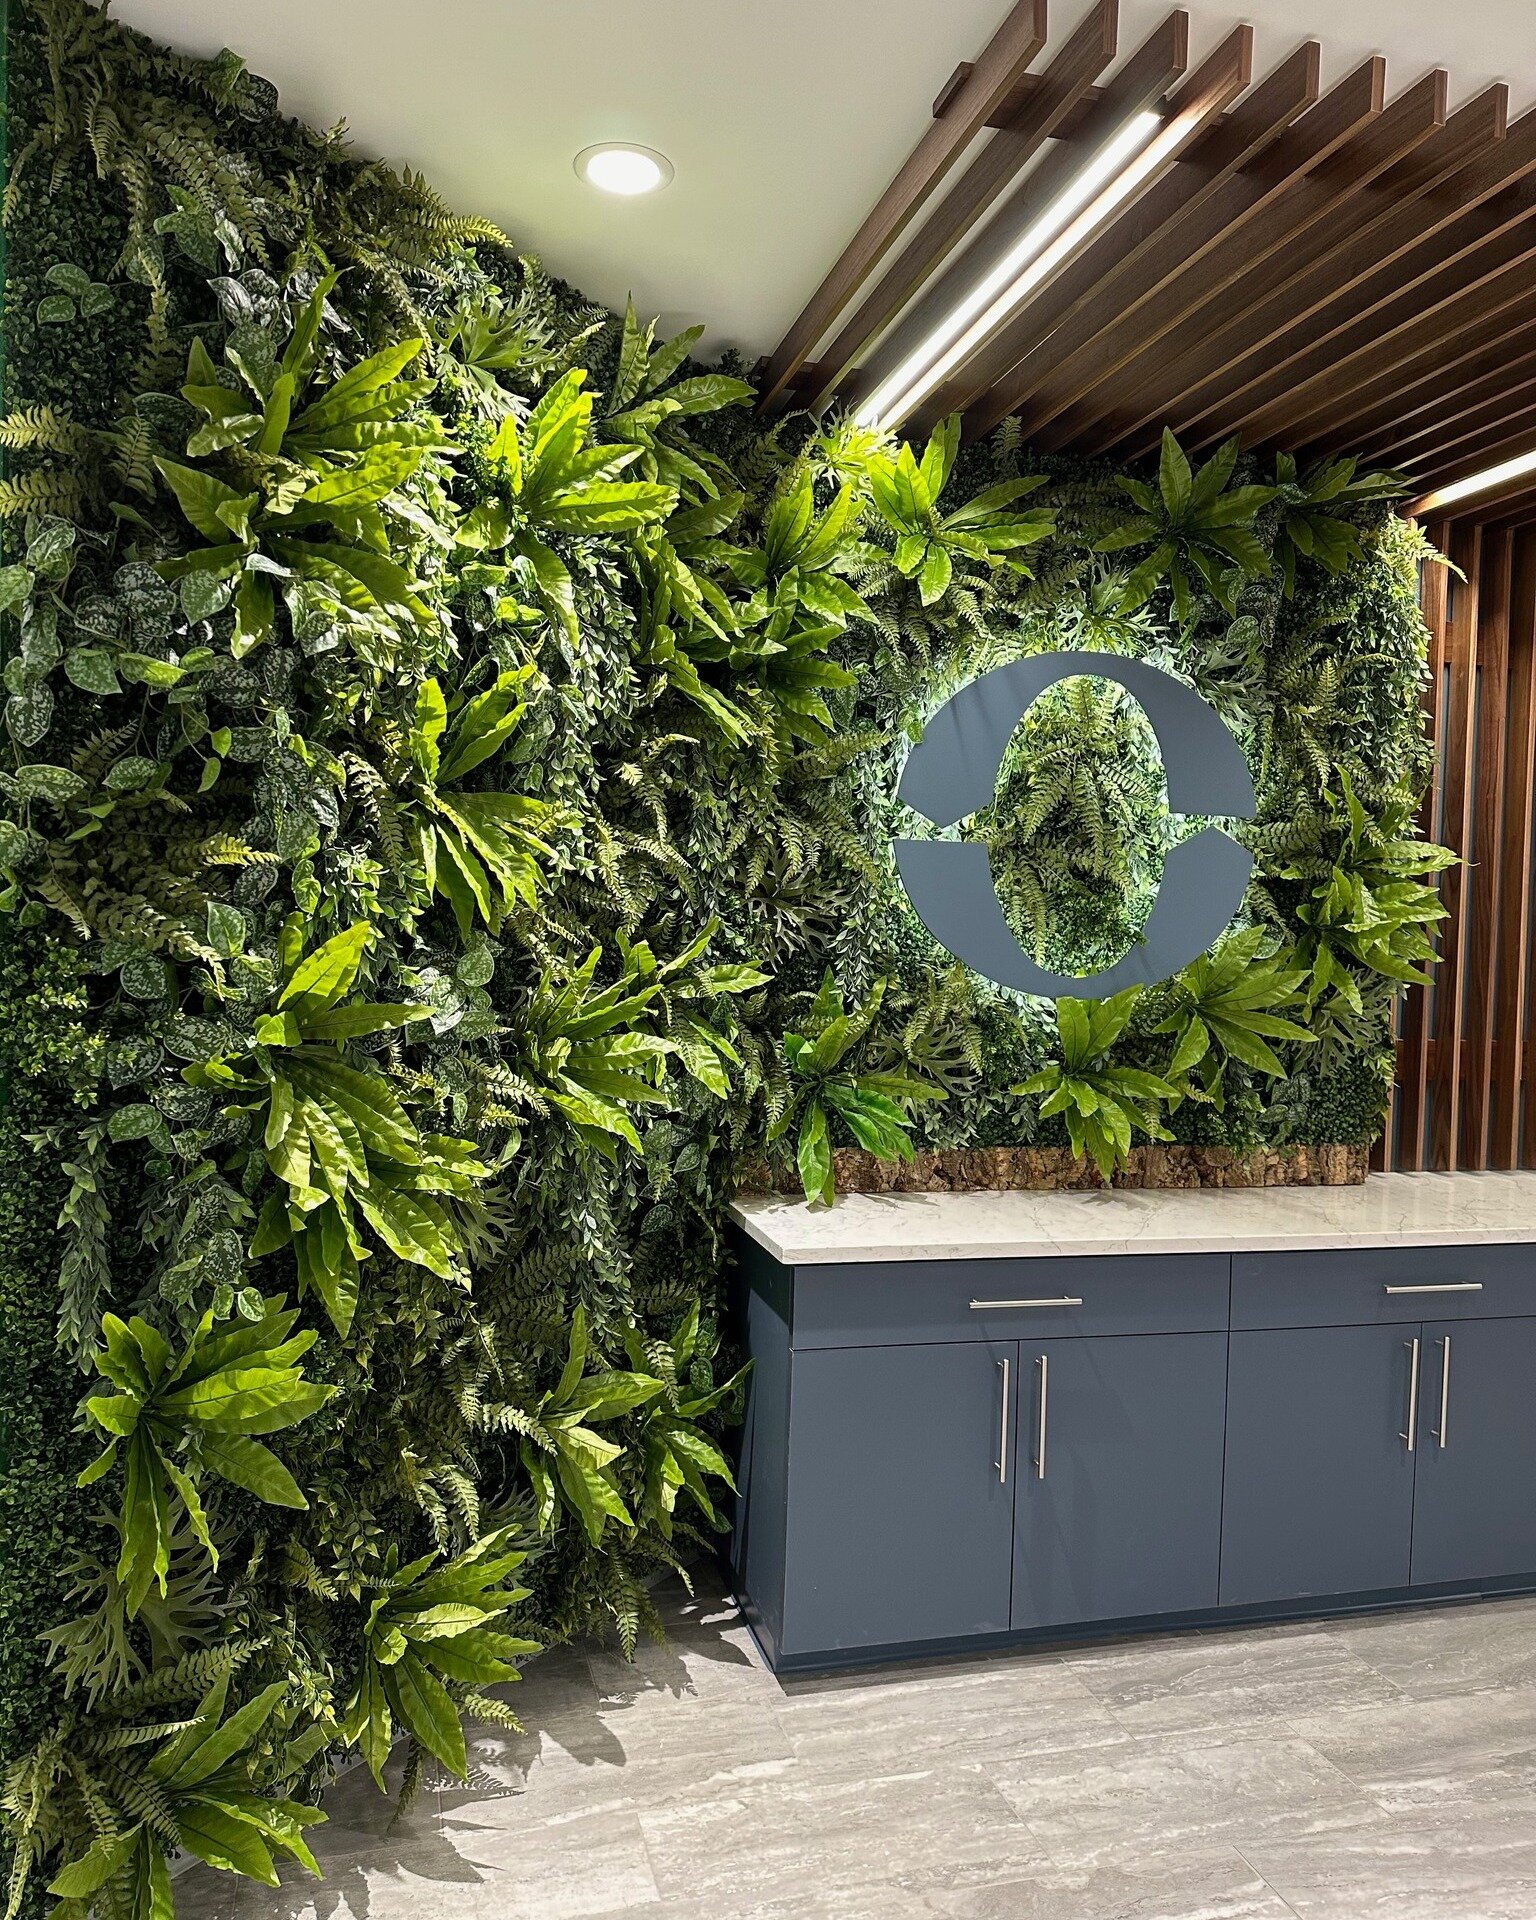 Where earthy vibes meet modern design. 

This replica green plant wall is complete with a backlit logo and bark base - also known as a &quot;barksplash!&quot; 
🌿

 #greenwall #interiorinspo #natureart #customdesign #interiorplantscape #replicaplantw